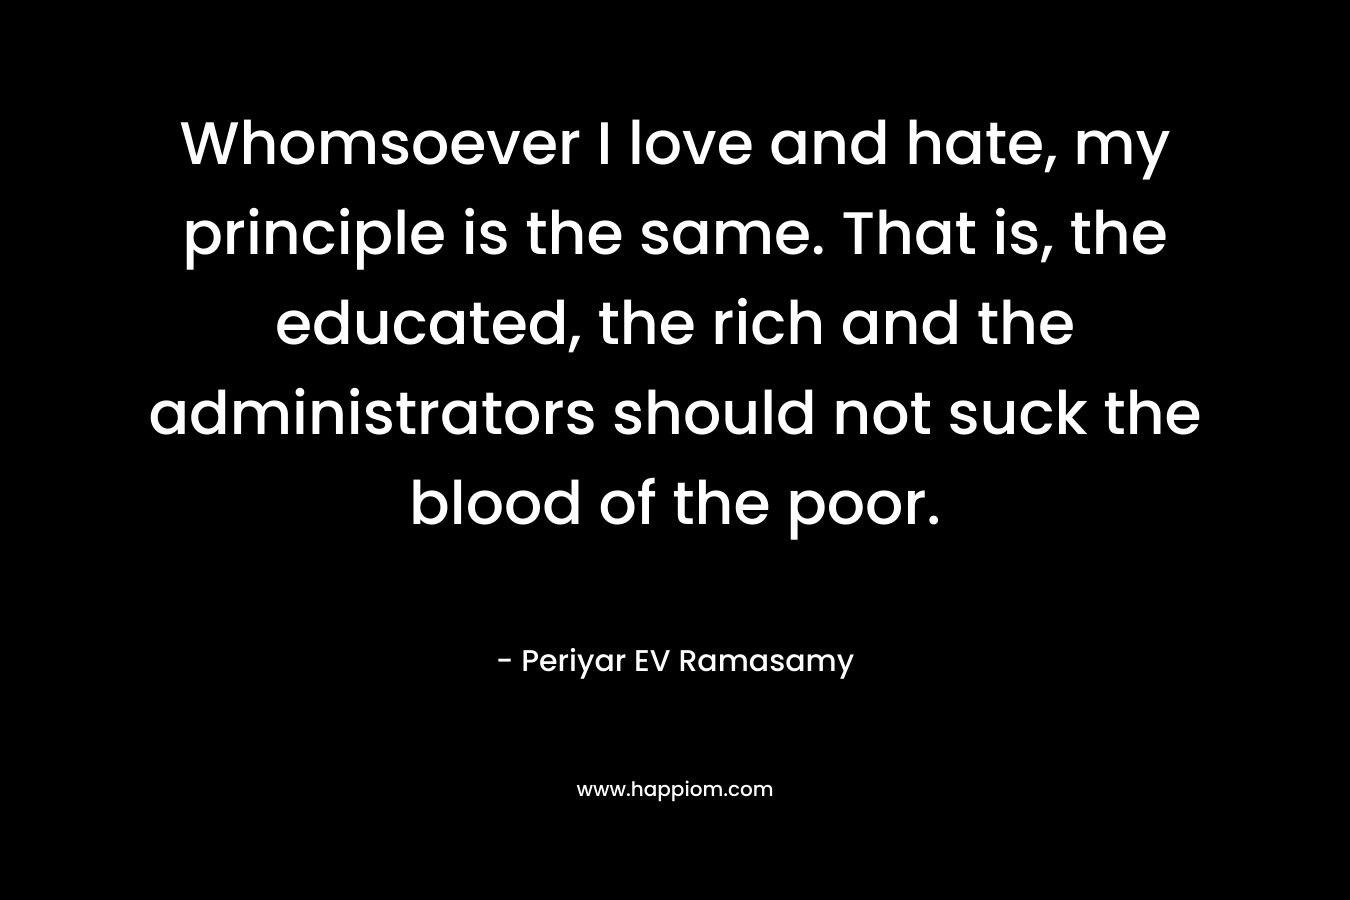 Whomsoever I love and hate, my principle is the same. That is, the educated, the rich and the administrators should not suck the blood of the poor. – Periyar EV Ramasamy